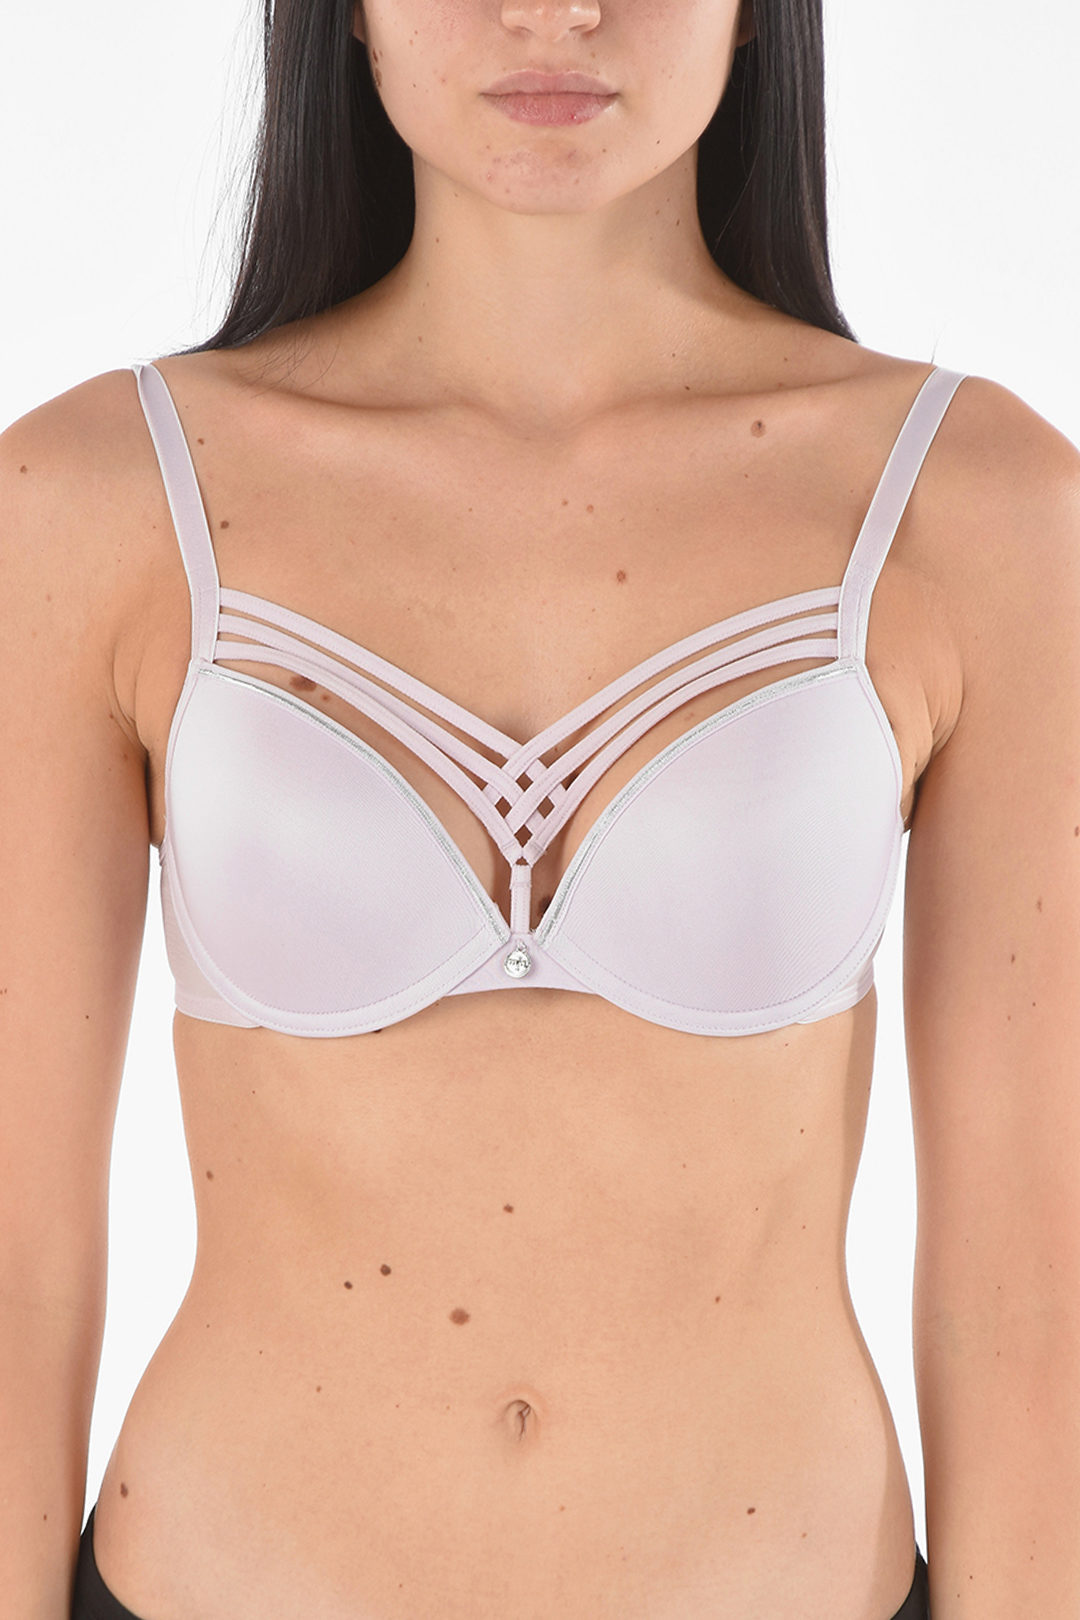 Marlies Dekkers Laces Bra with Cut-Out Details women - Glamood Outlet